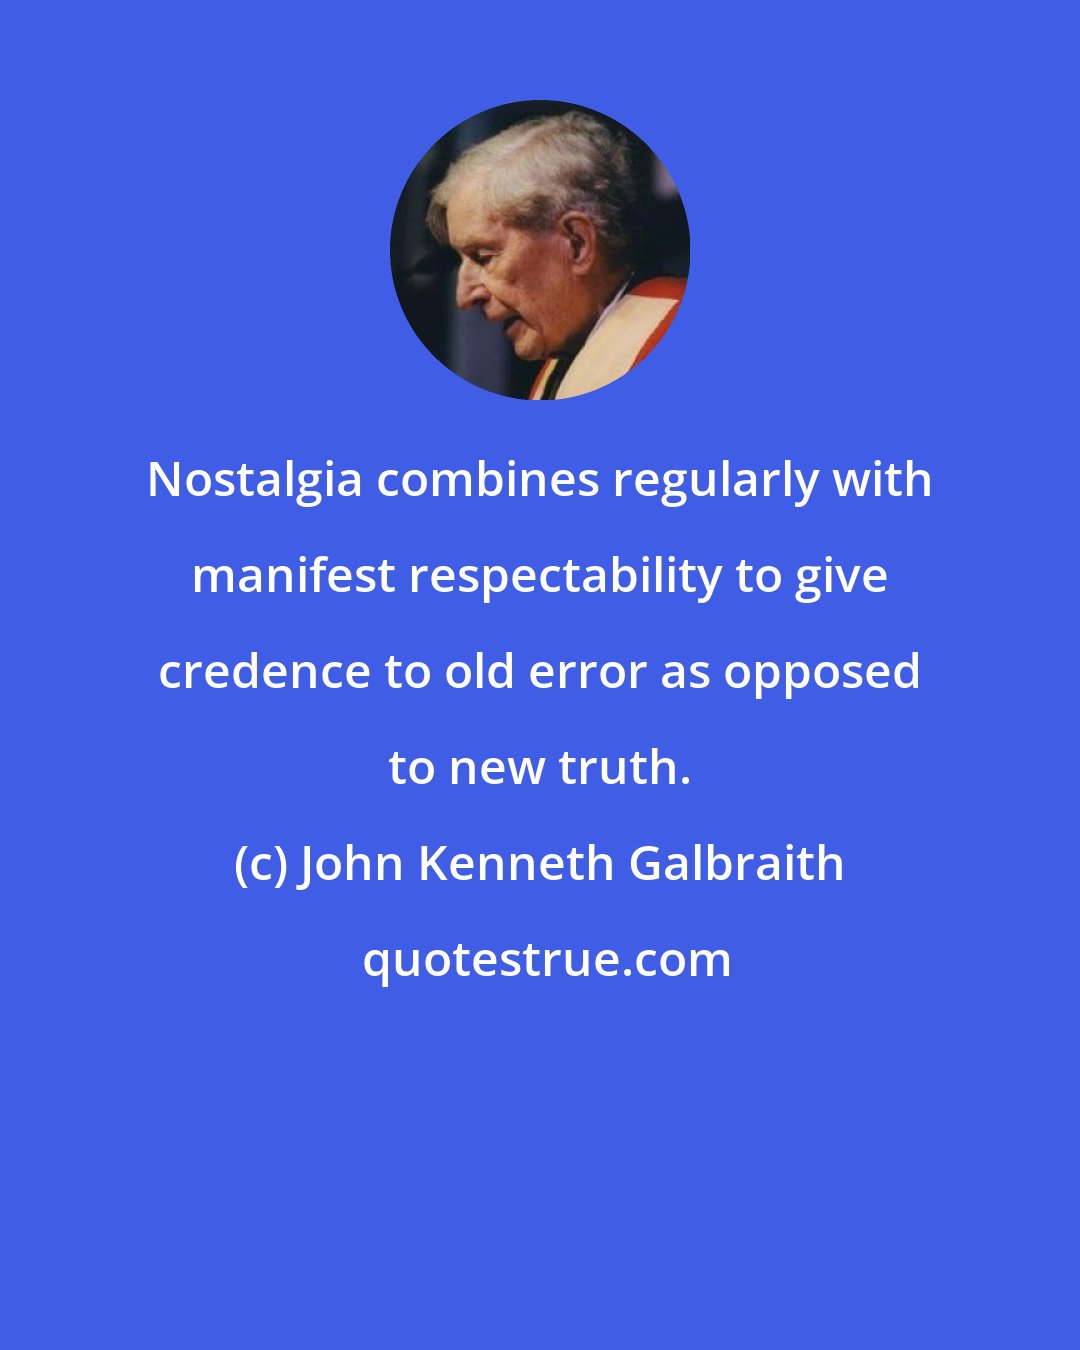 John Kenneth Galbraith: Nostalgia combines regularly with manifest respectability to give credence to old error as opposed to new truth.